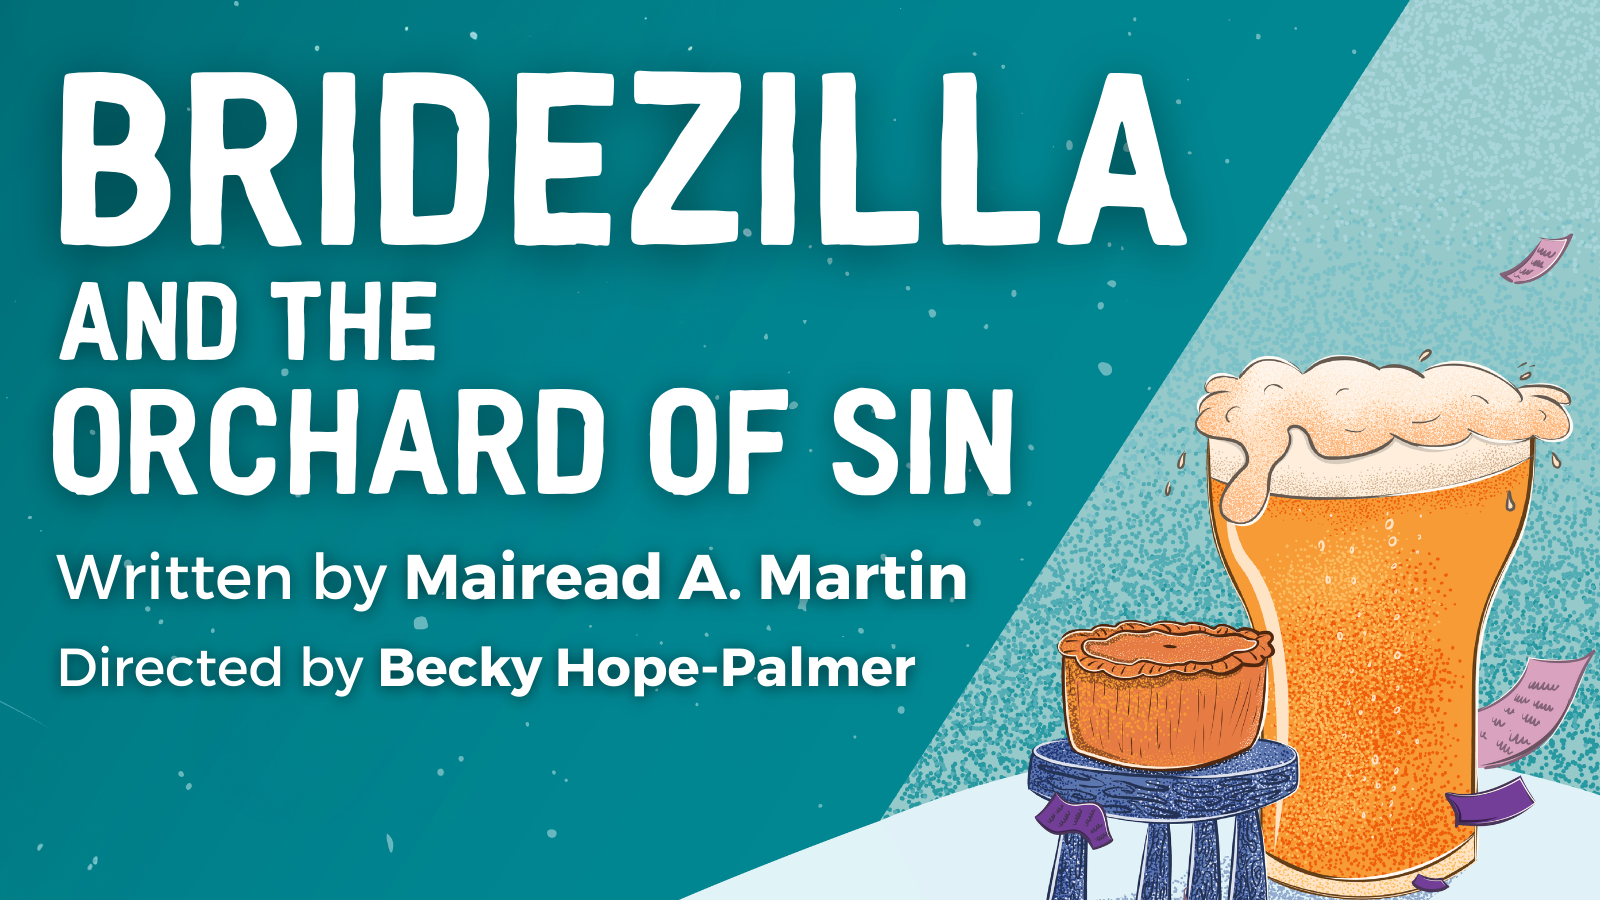 Bridezilla and the Orchard of Sin